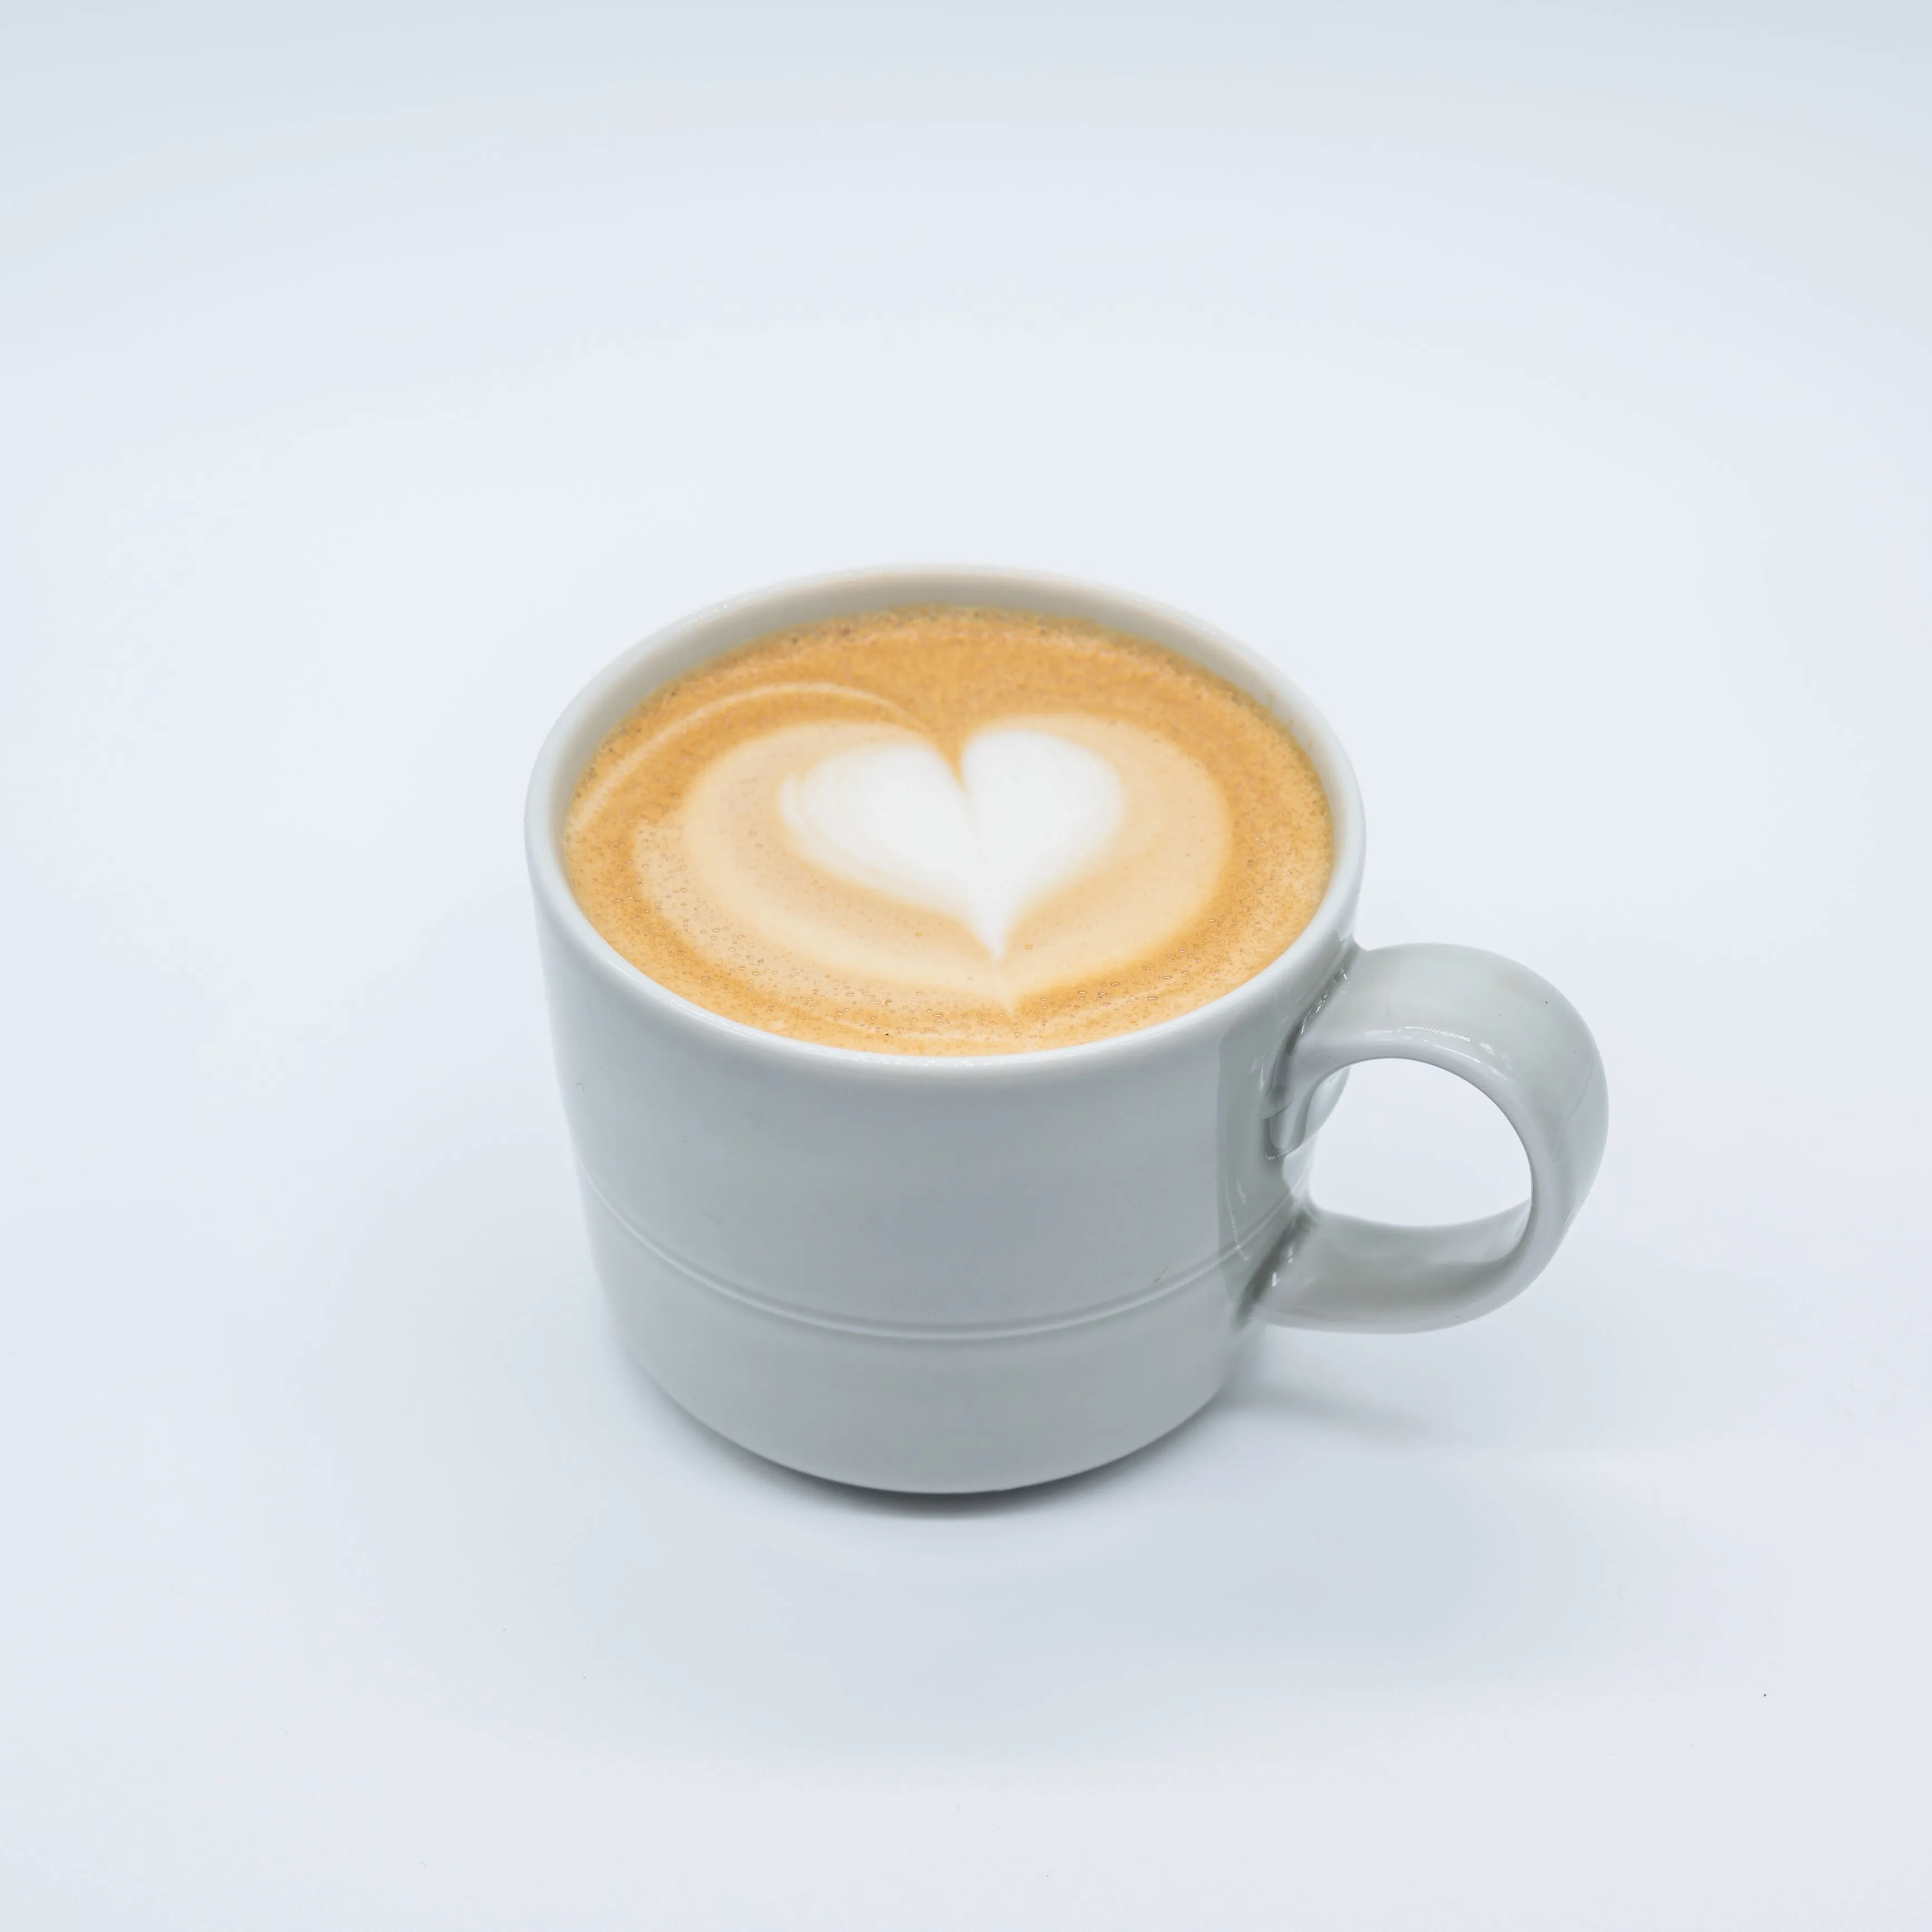 A cup of cappuccino with heart-shaped latte art on a white background.